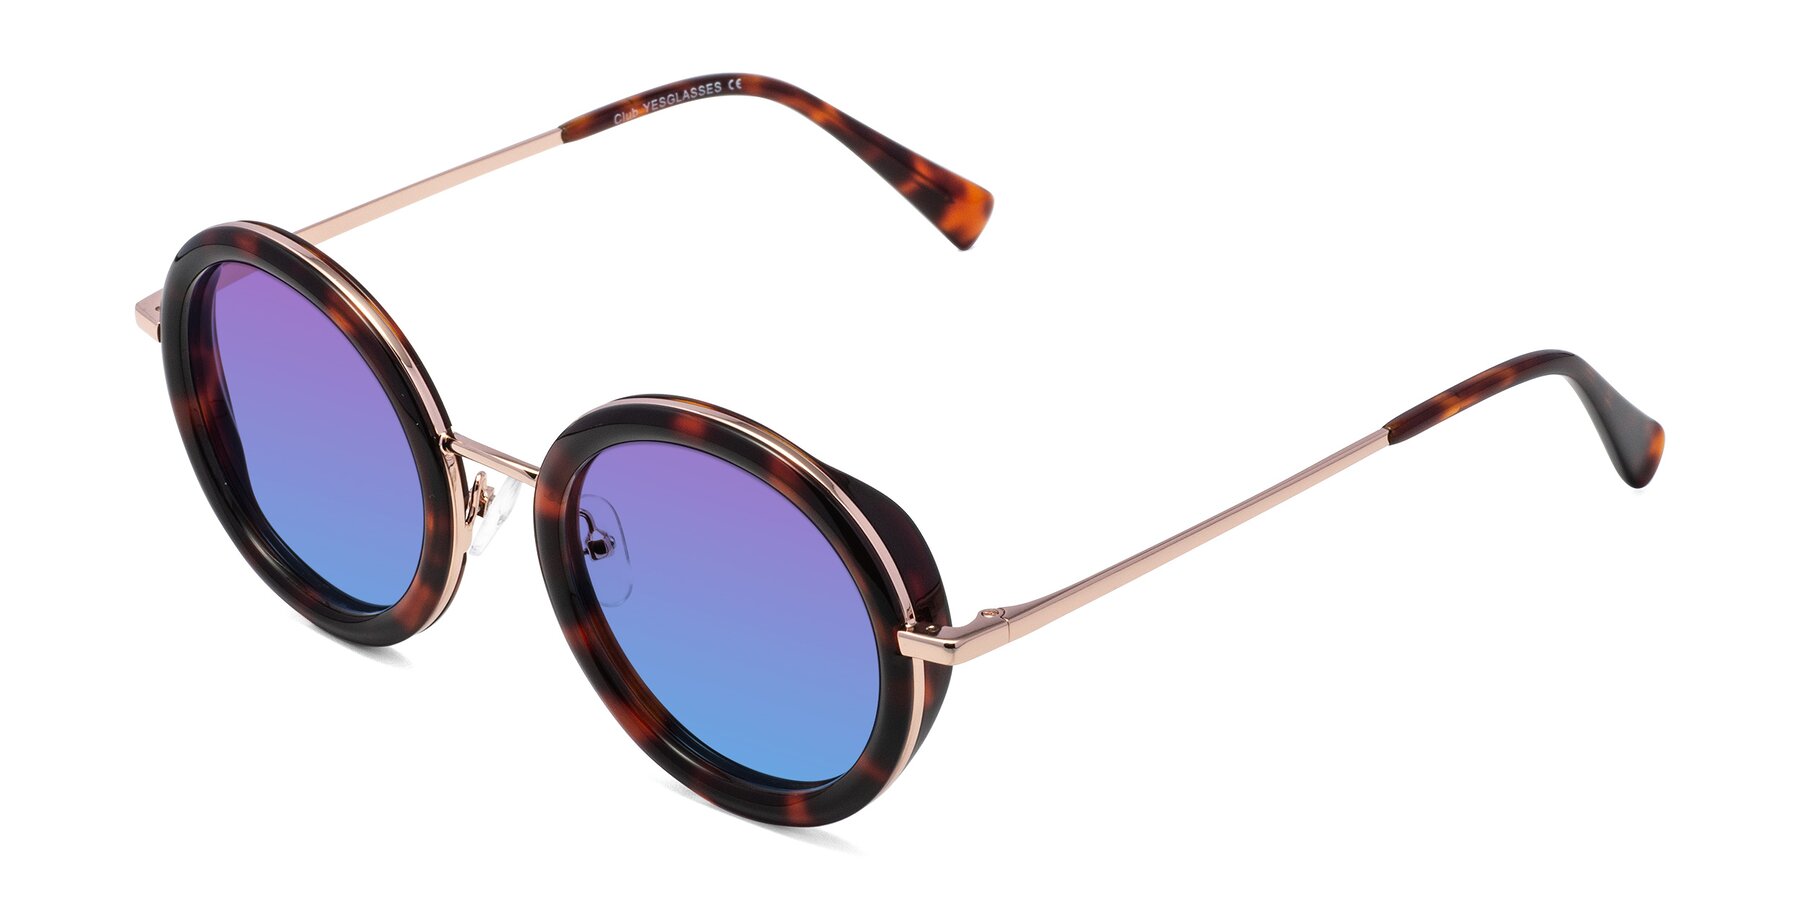 Angle of Club in Tortoise-Rose Gold with Purple / Blue Gradient Lenses